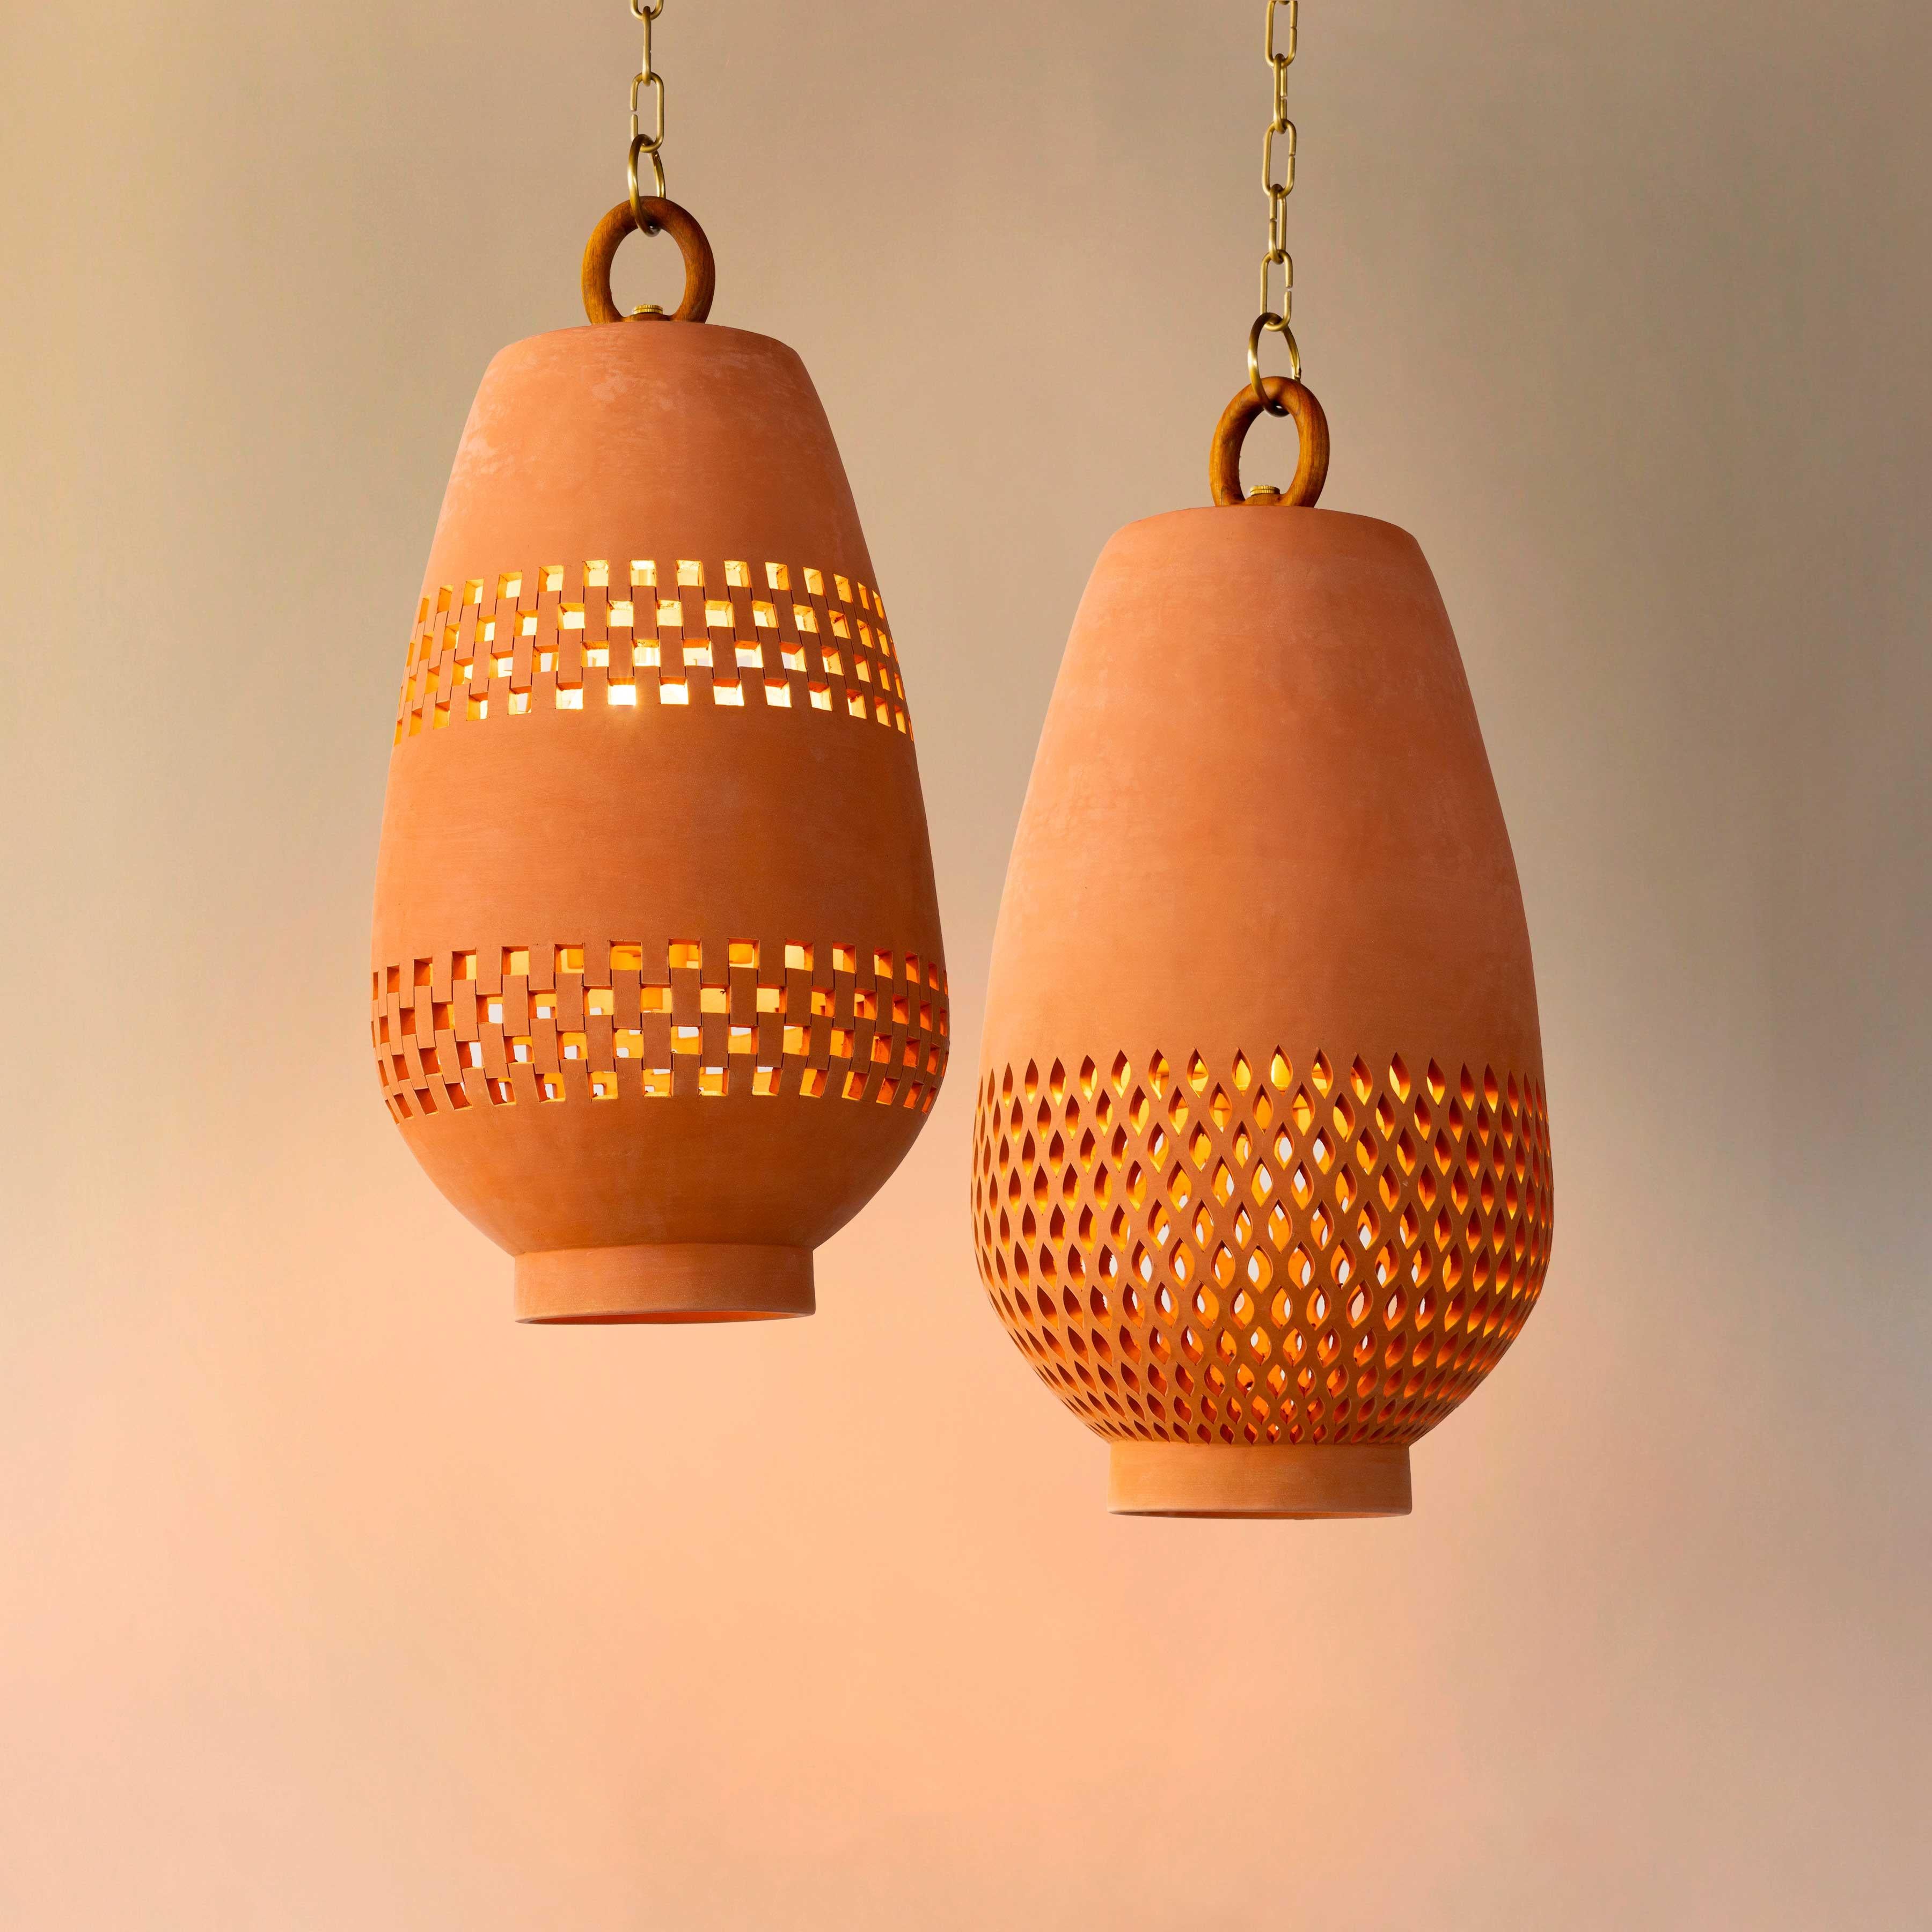 Hand-Crafted Terracotta Ceramic Pendant Light XL, Natural Brass, Ajedrez Atzompa Collection For Sale